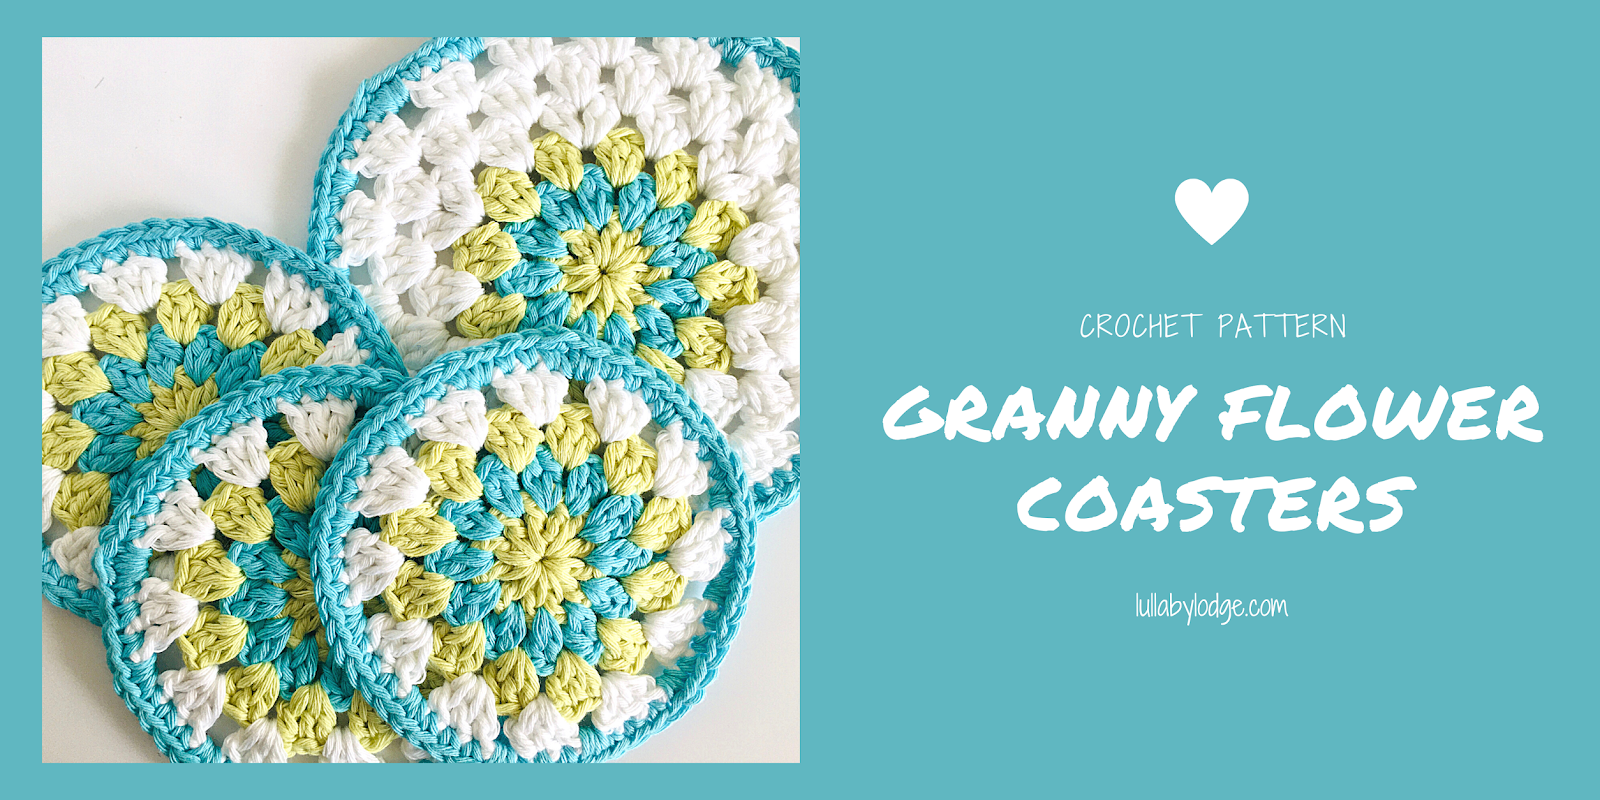 Lullaby Lodge: Ombre Crochet Coasters - Our Happy CAL Place, weekly and  monthly crochet along group on Ravelry